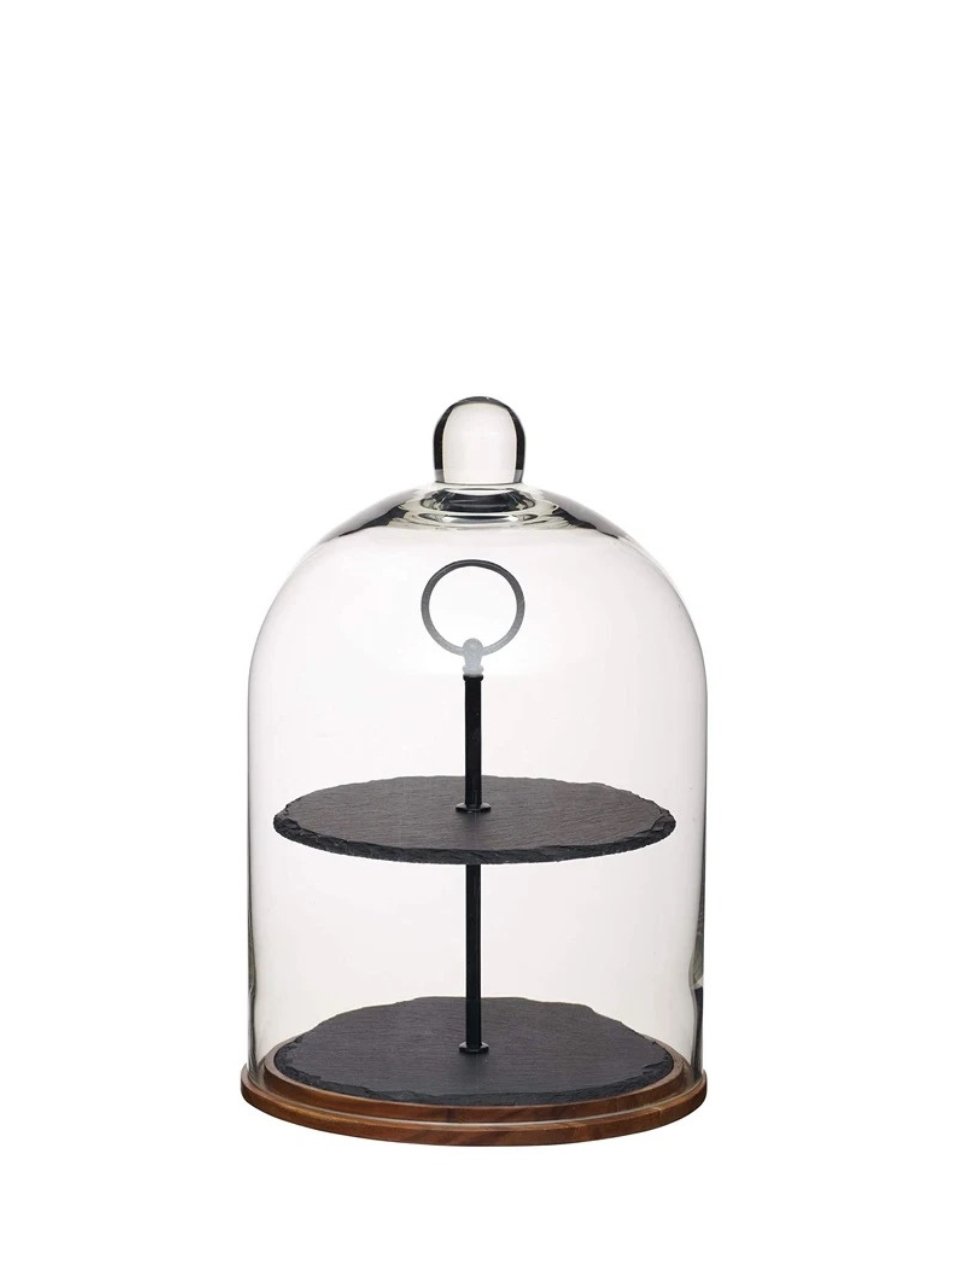 2-Tier Serving Stand with glass Dome